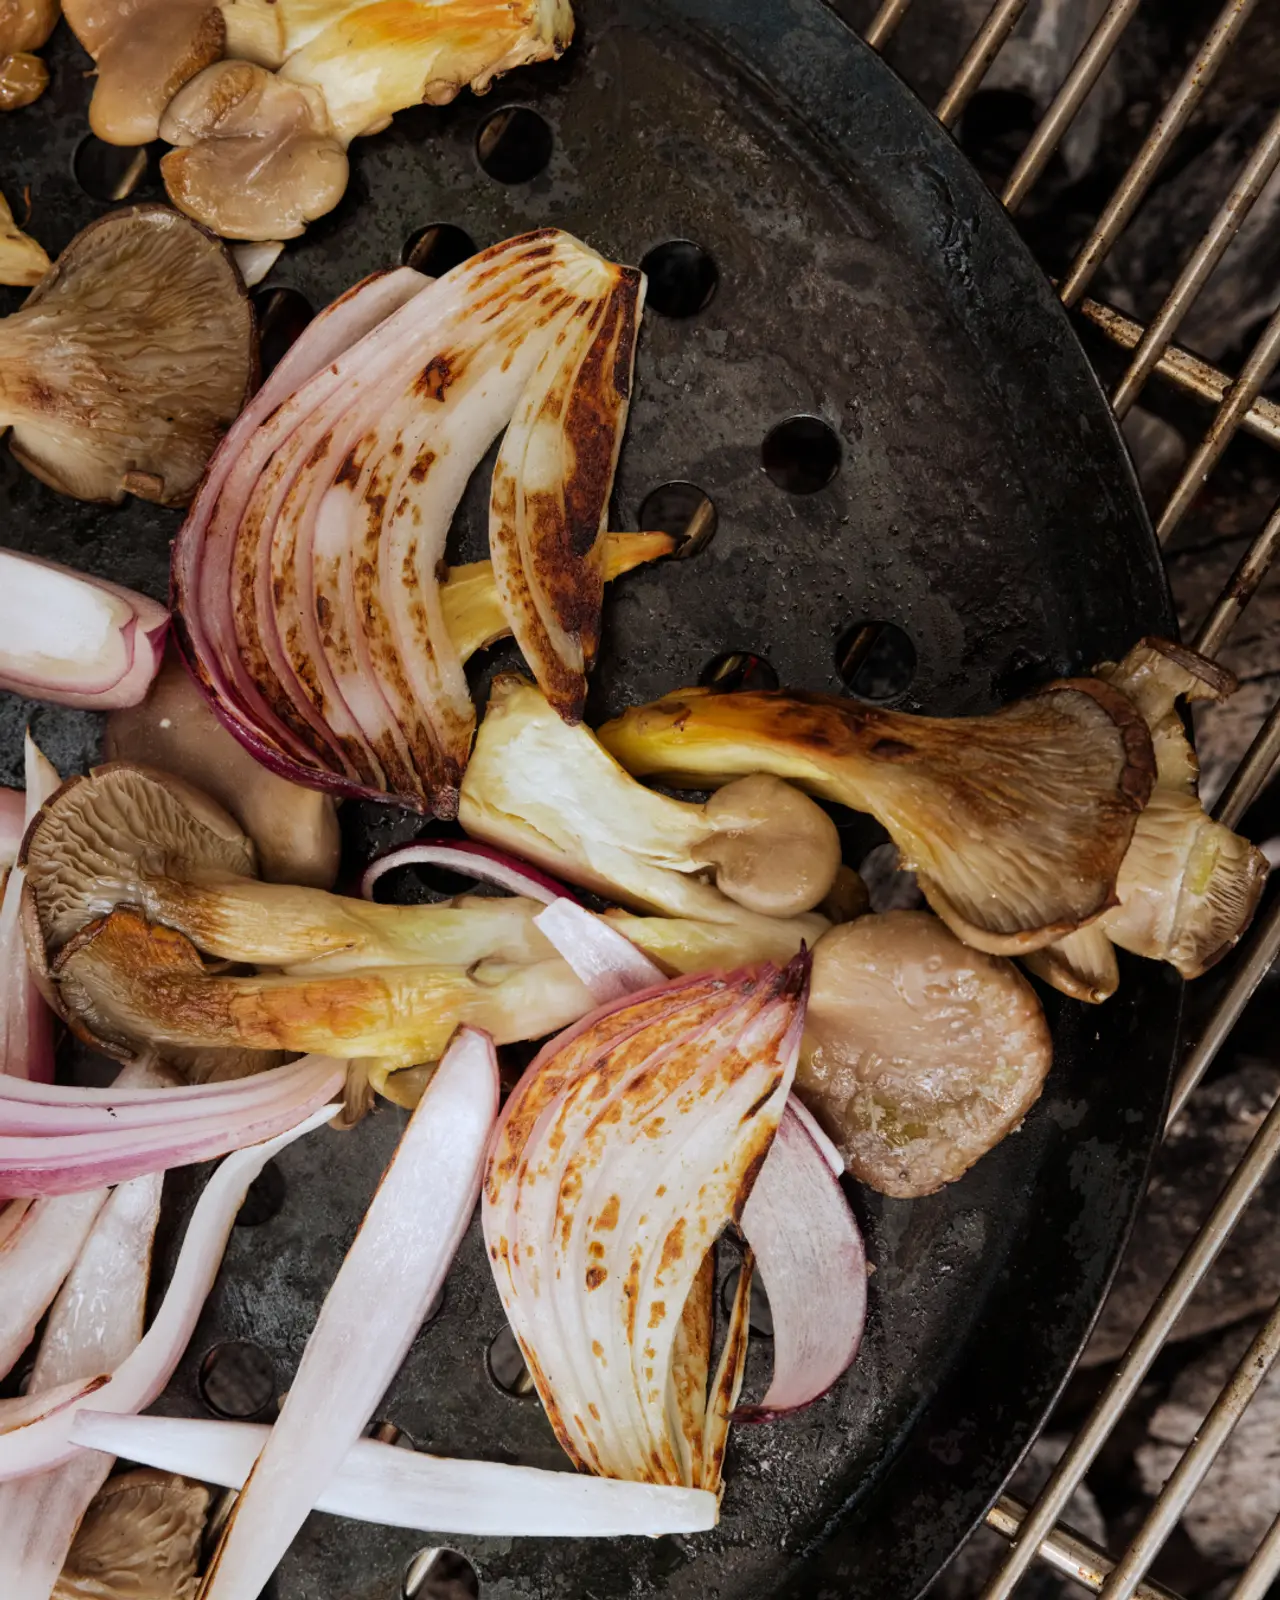 Sliced onions and mushrooms are grilled on a round, black perforated pan.